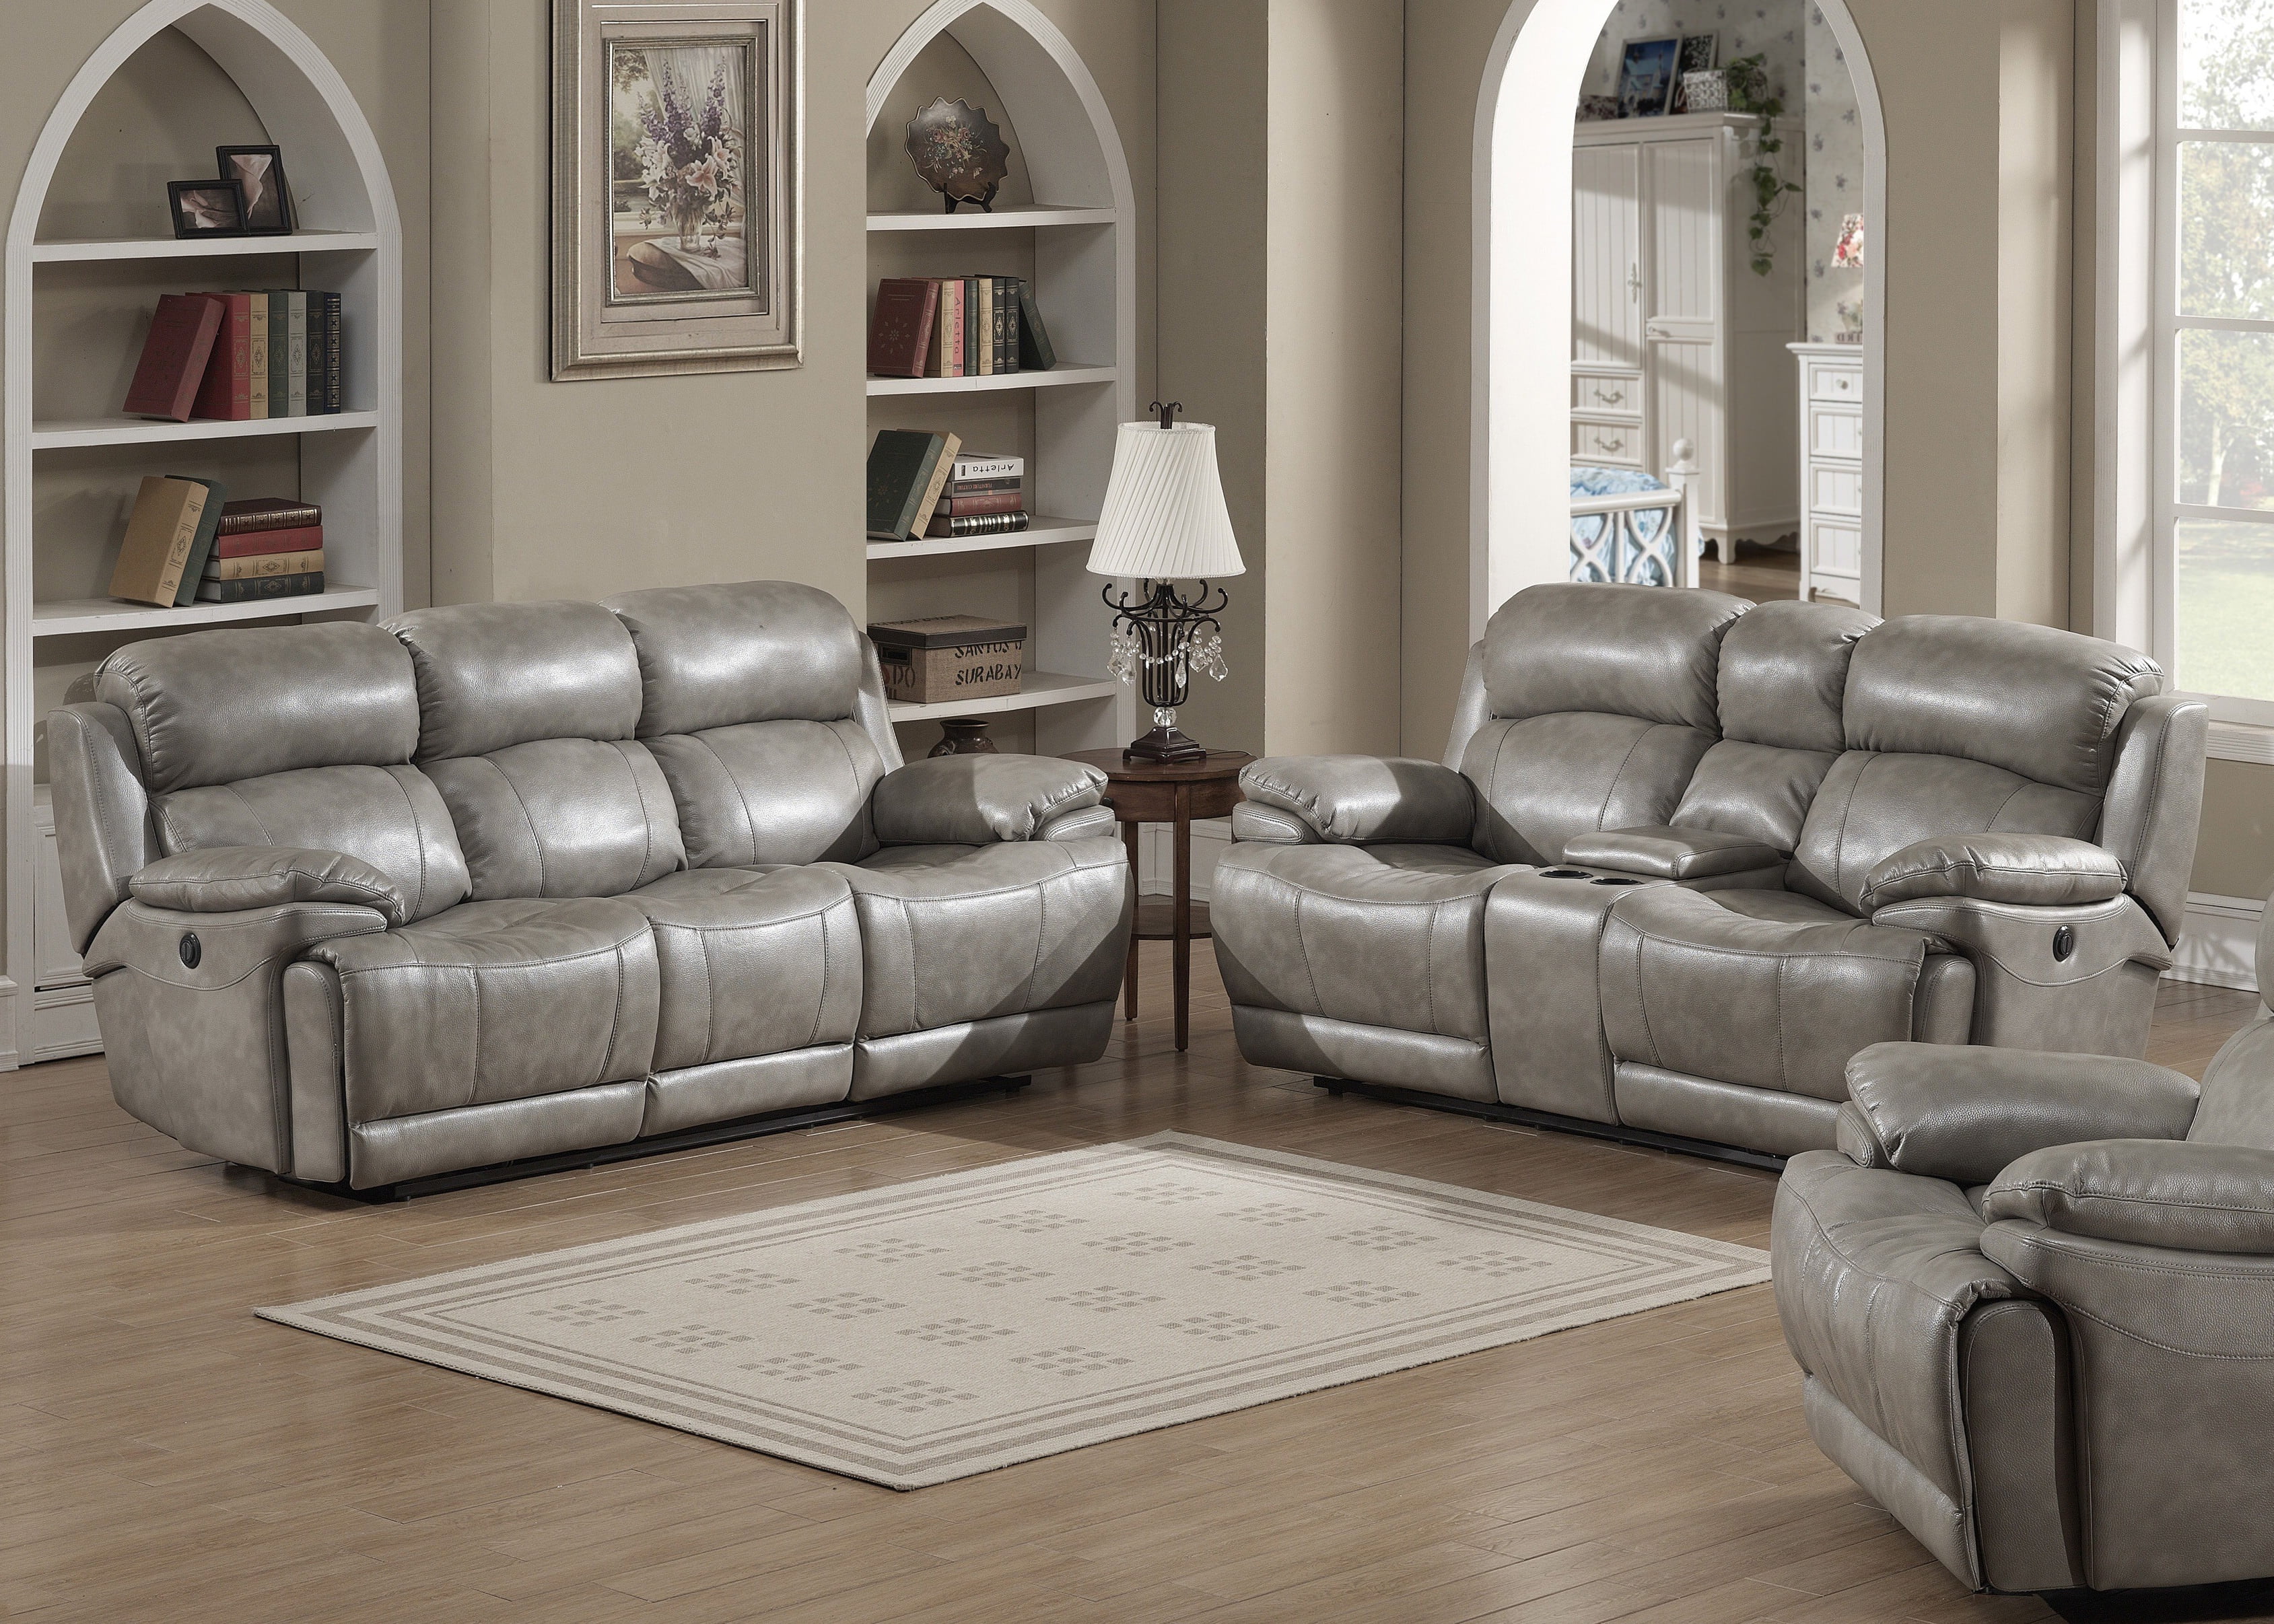 2 Piece Memphis Reclining Living Room Collection